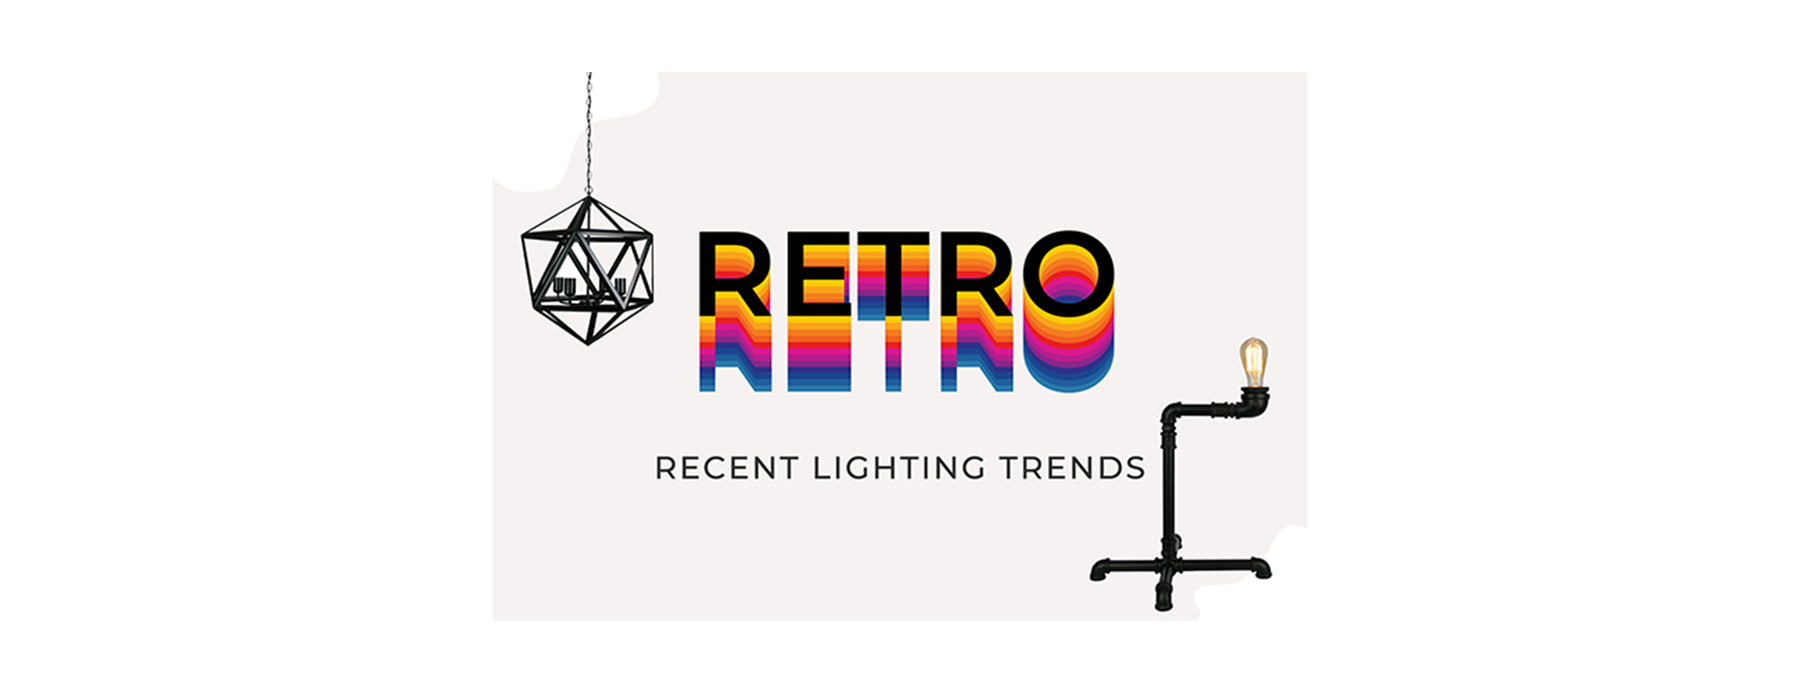 A Guide to the Latest Retro Lighting Trends